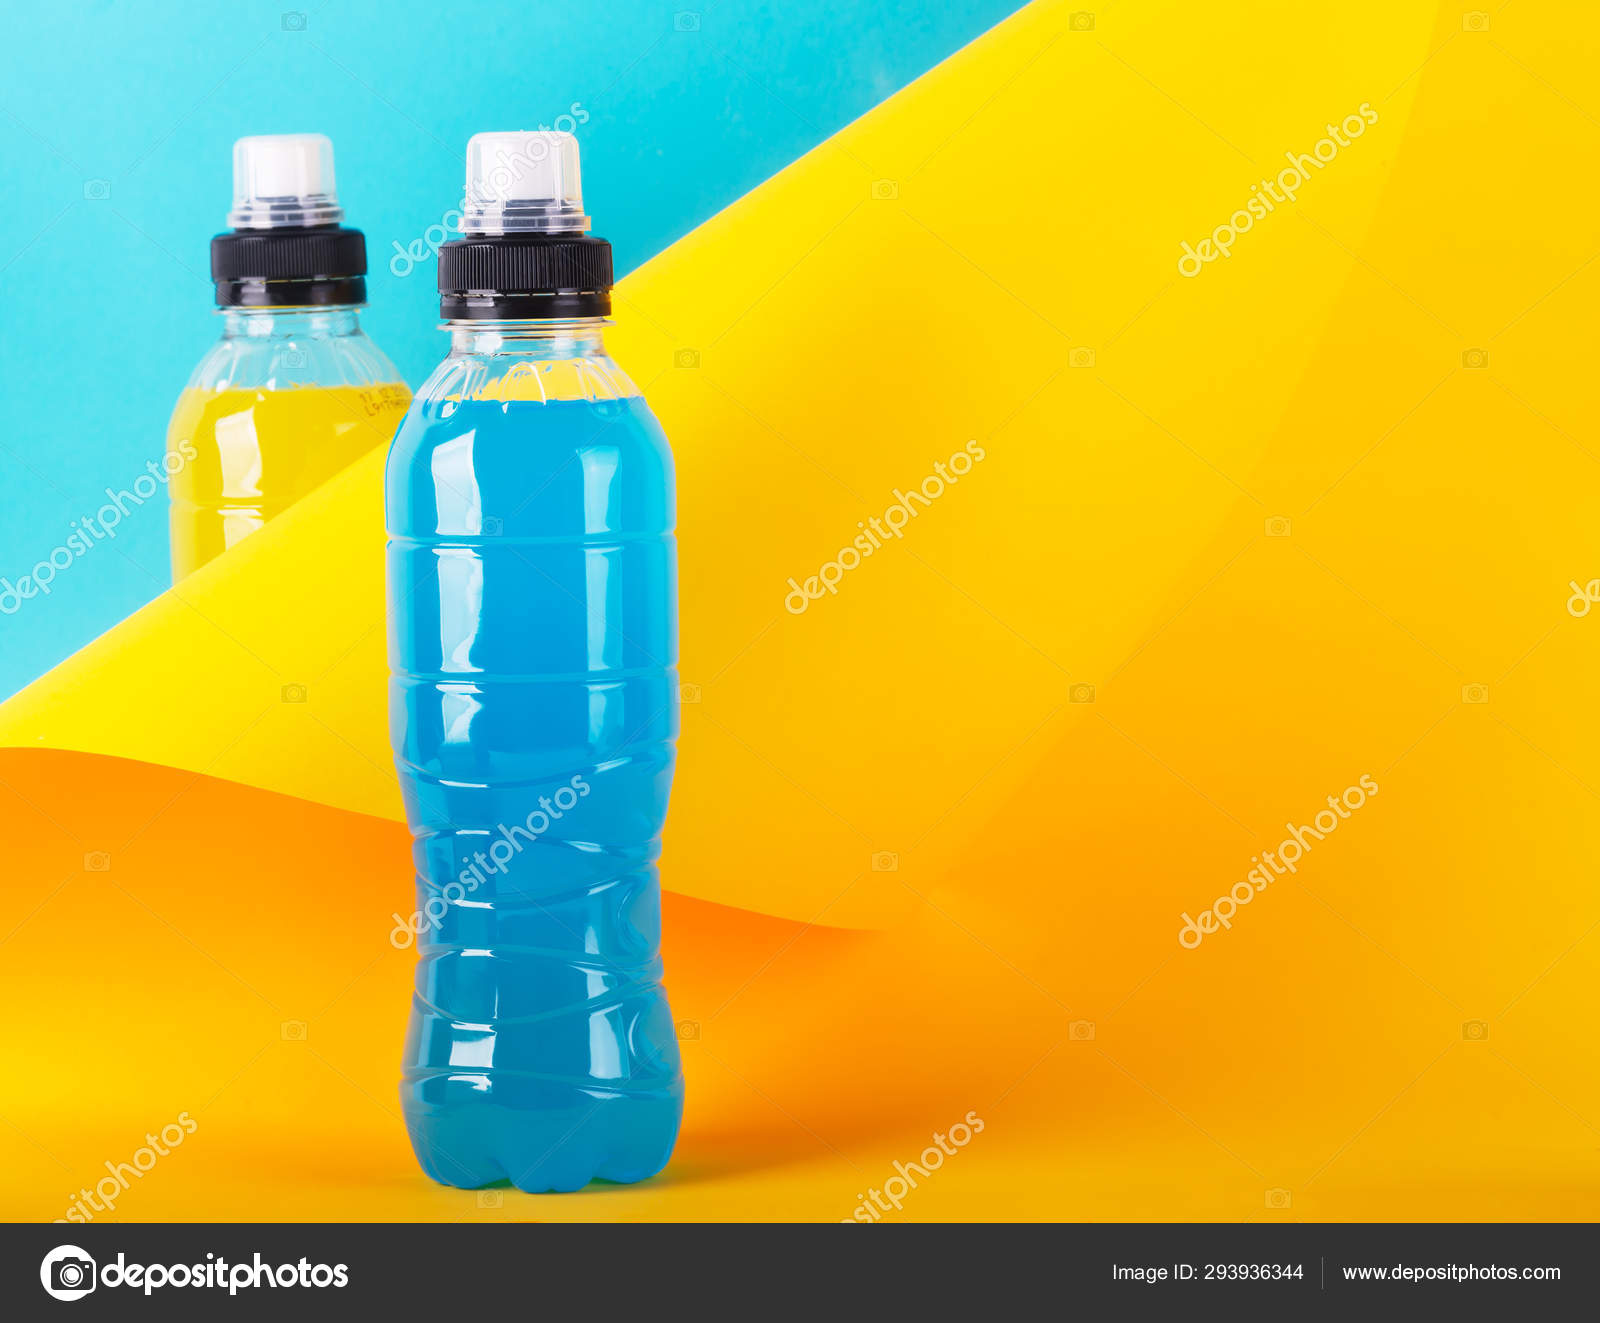 Isotonic Energy Drink Bottles With Blue And Yellow Transparent Liquid Sport Beverage On A Colorful Background Stock Photo By C Civil